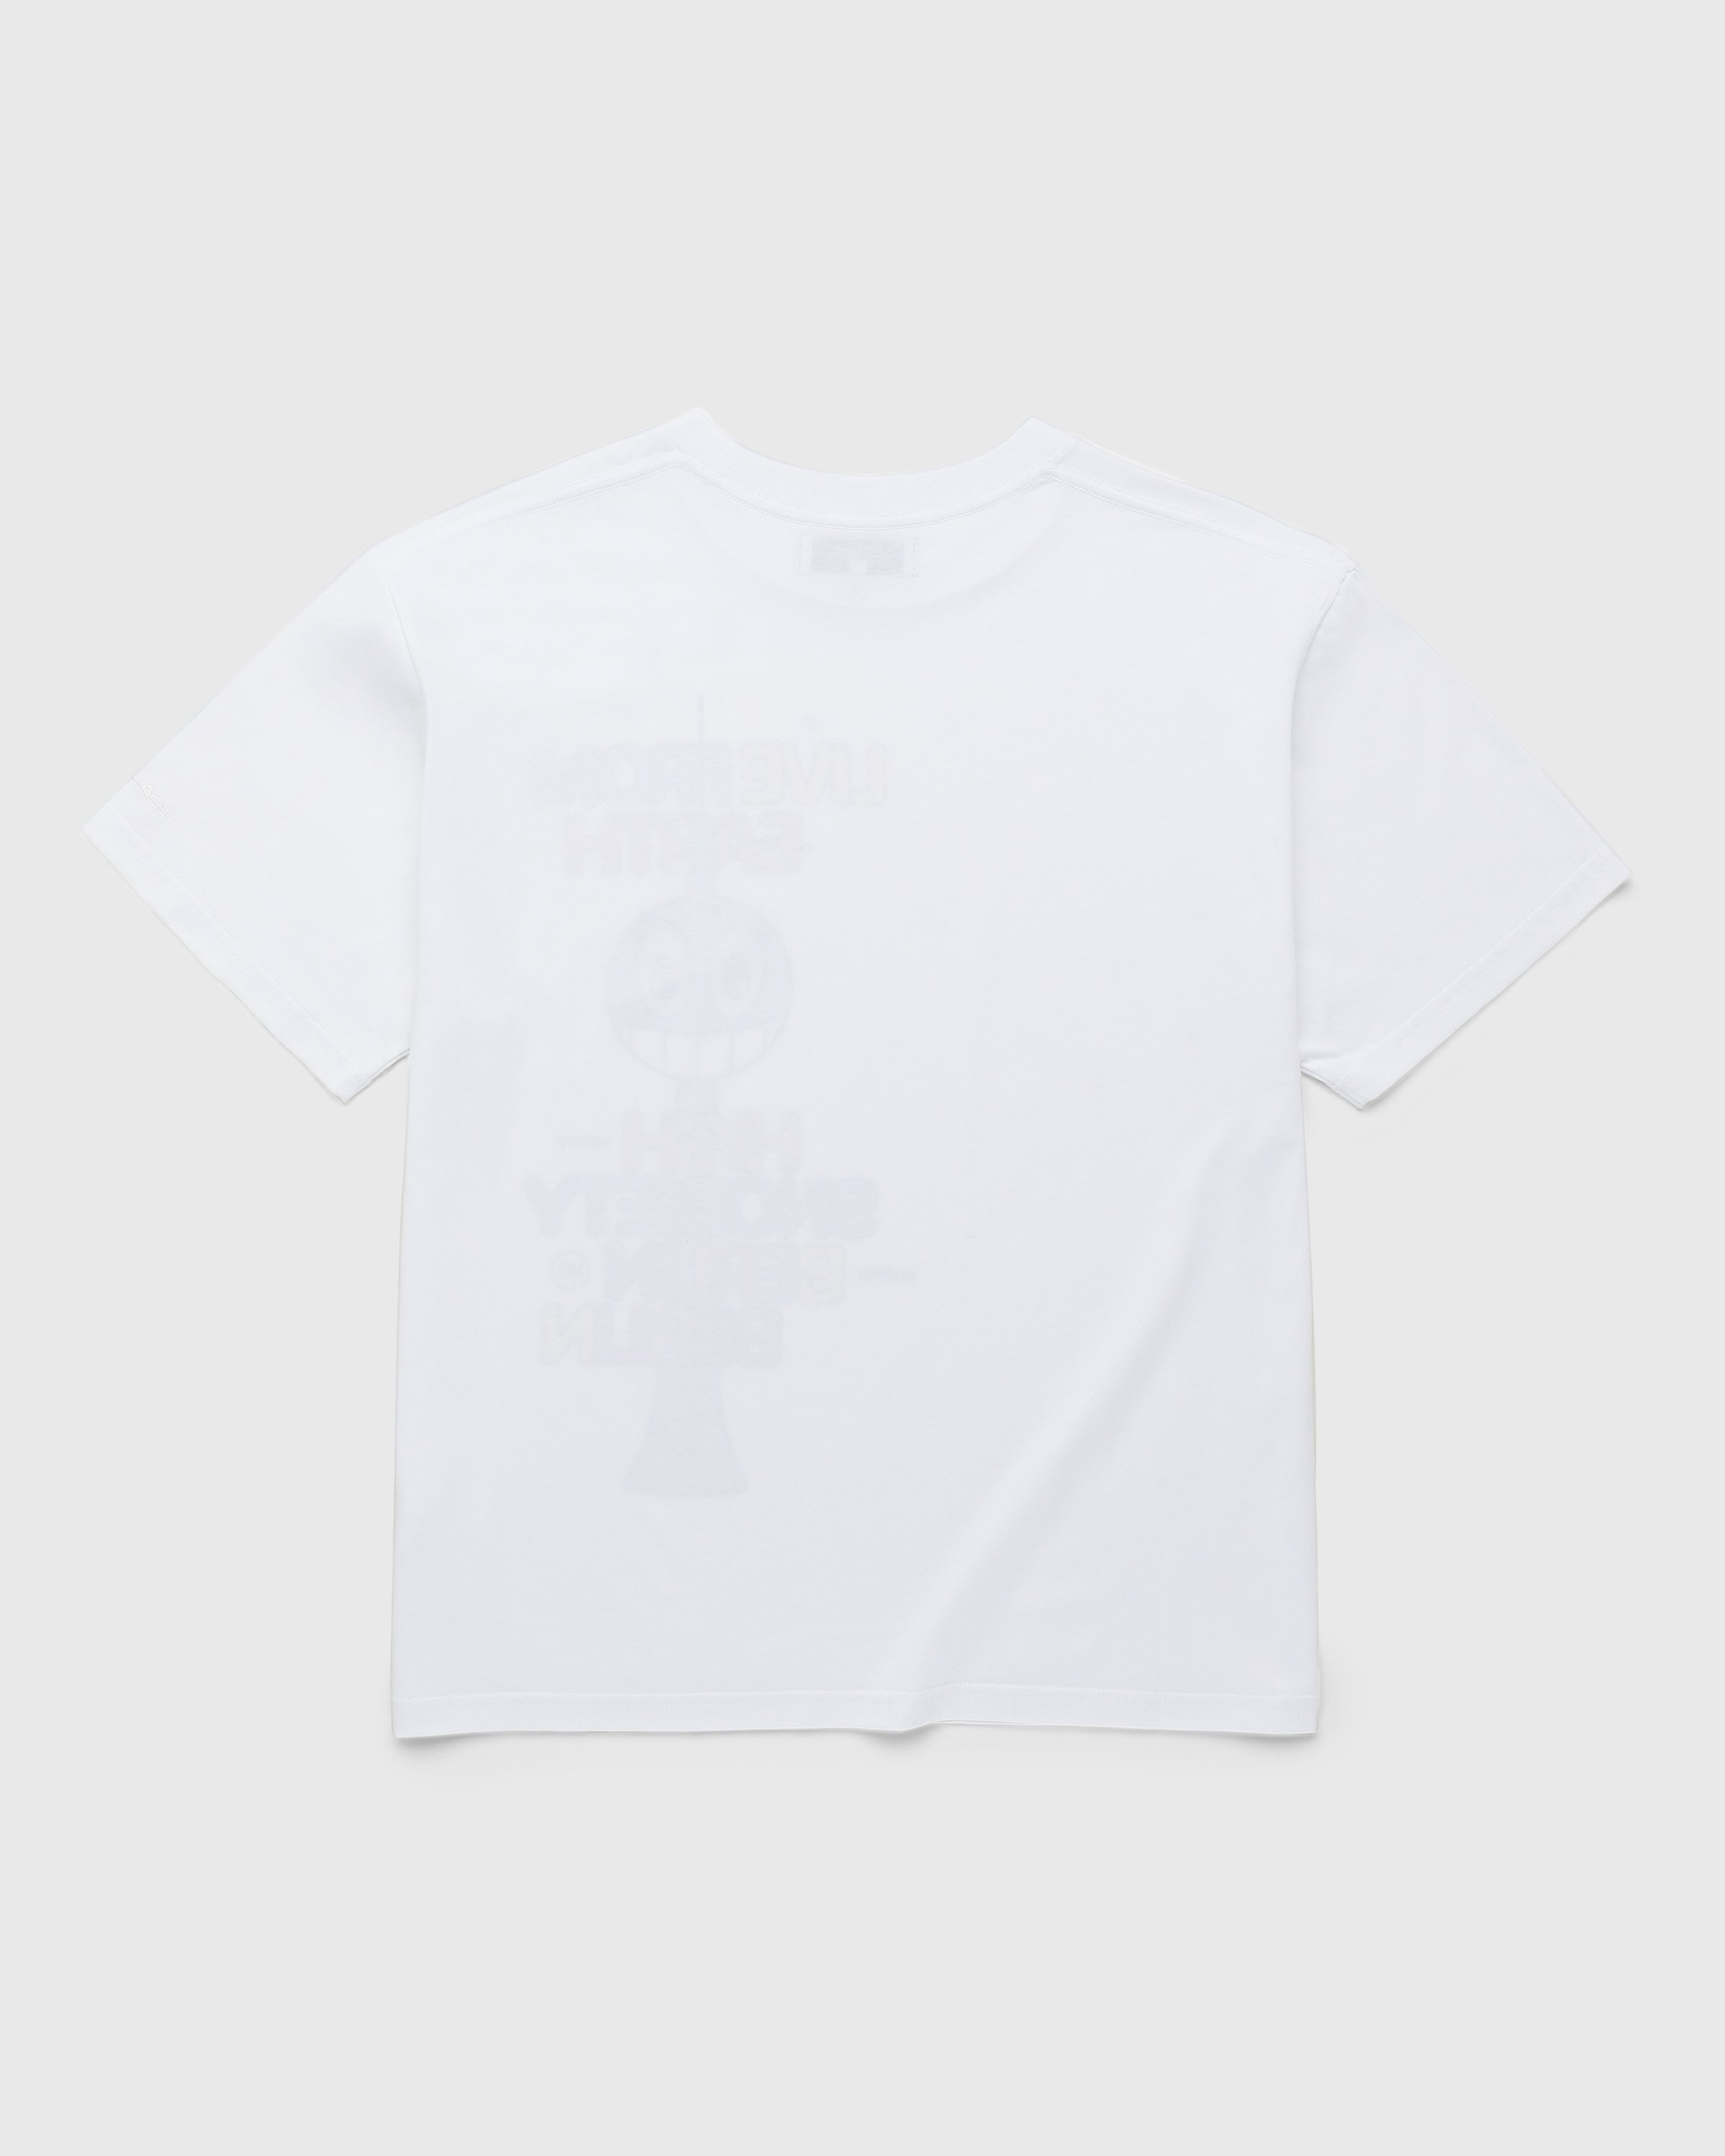 Live From Earth x Highsnobiety - BERLIN, BERLIN 3 T-Shirt White - Clothing - White - Image 2